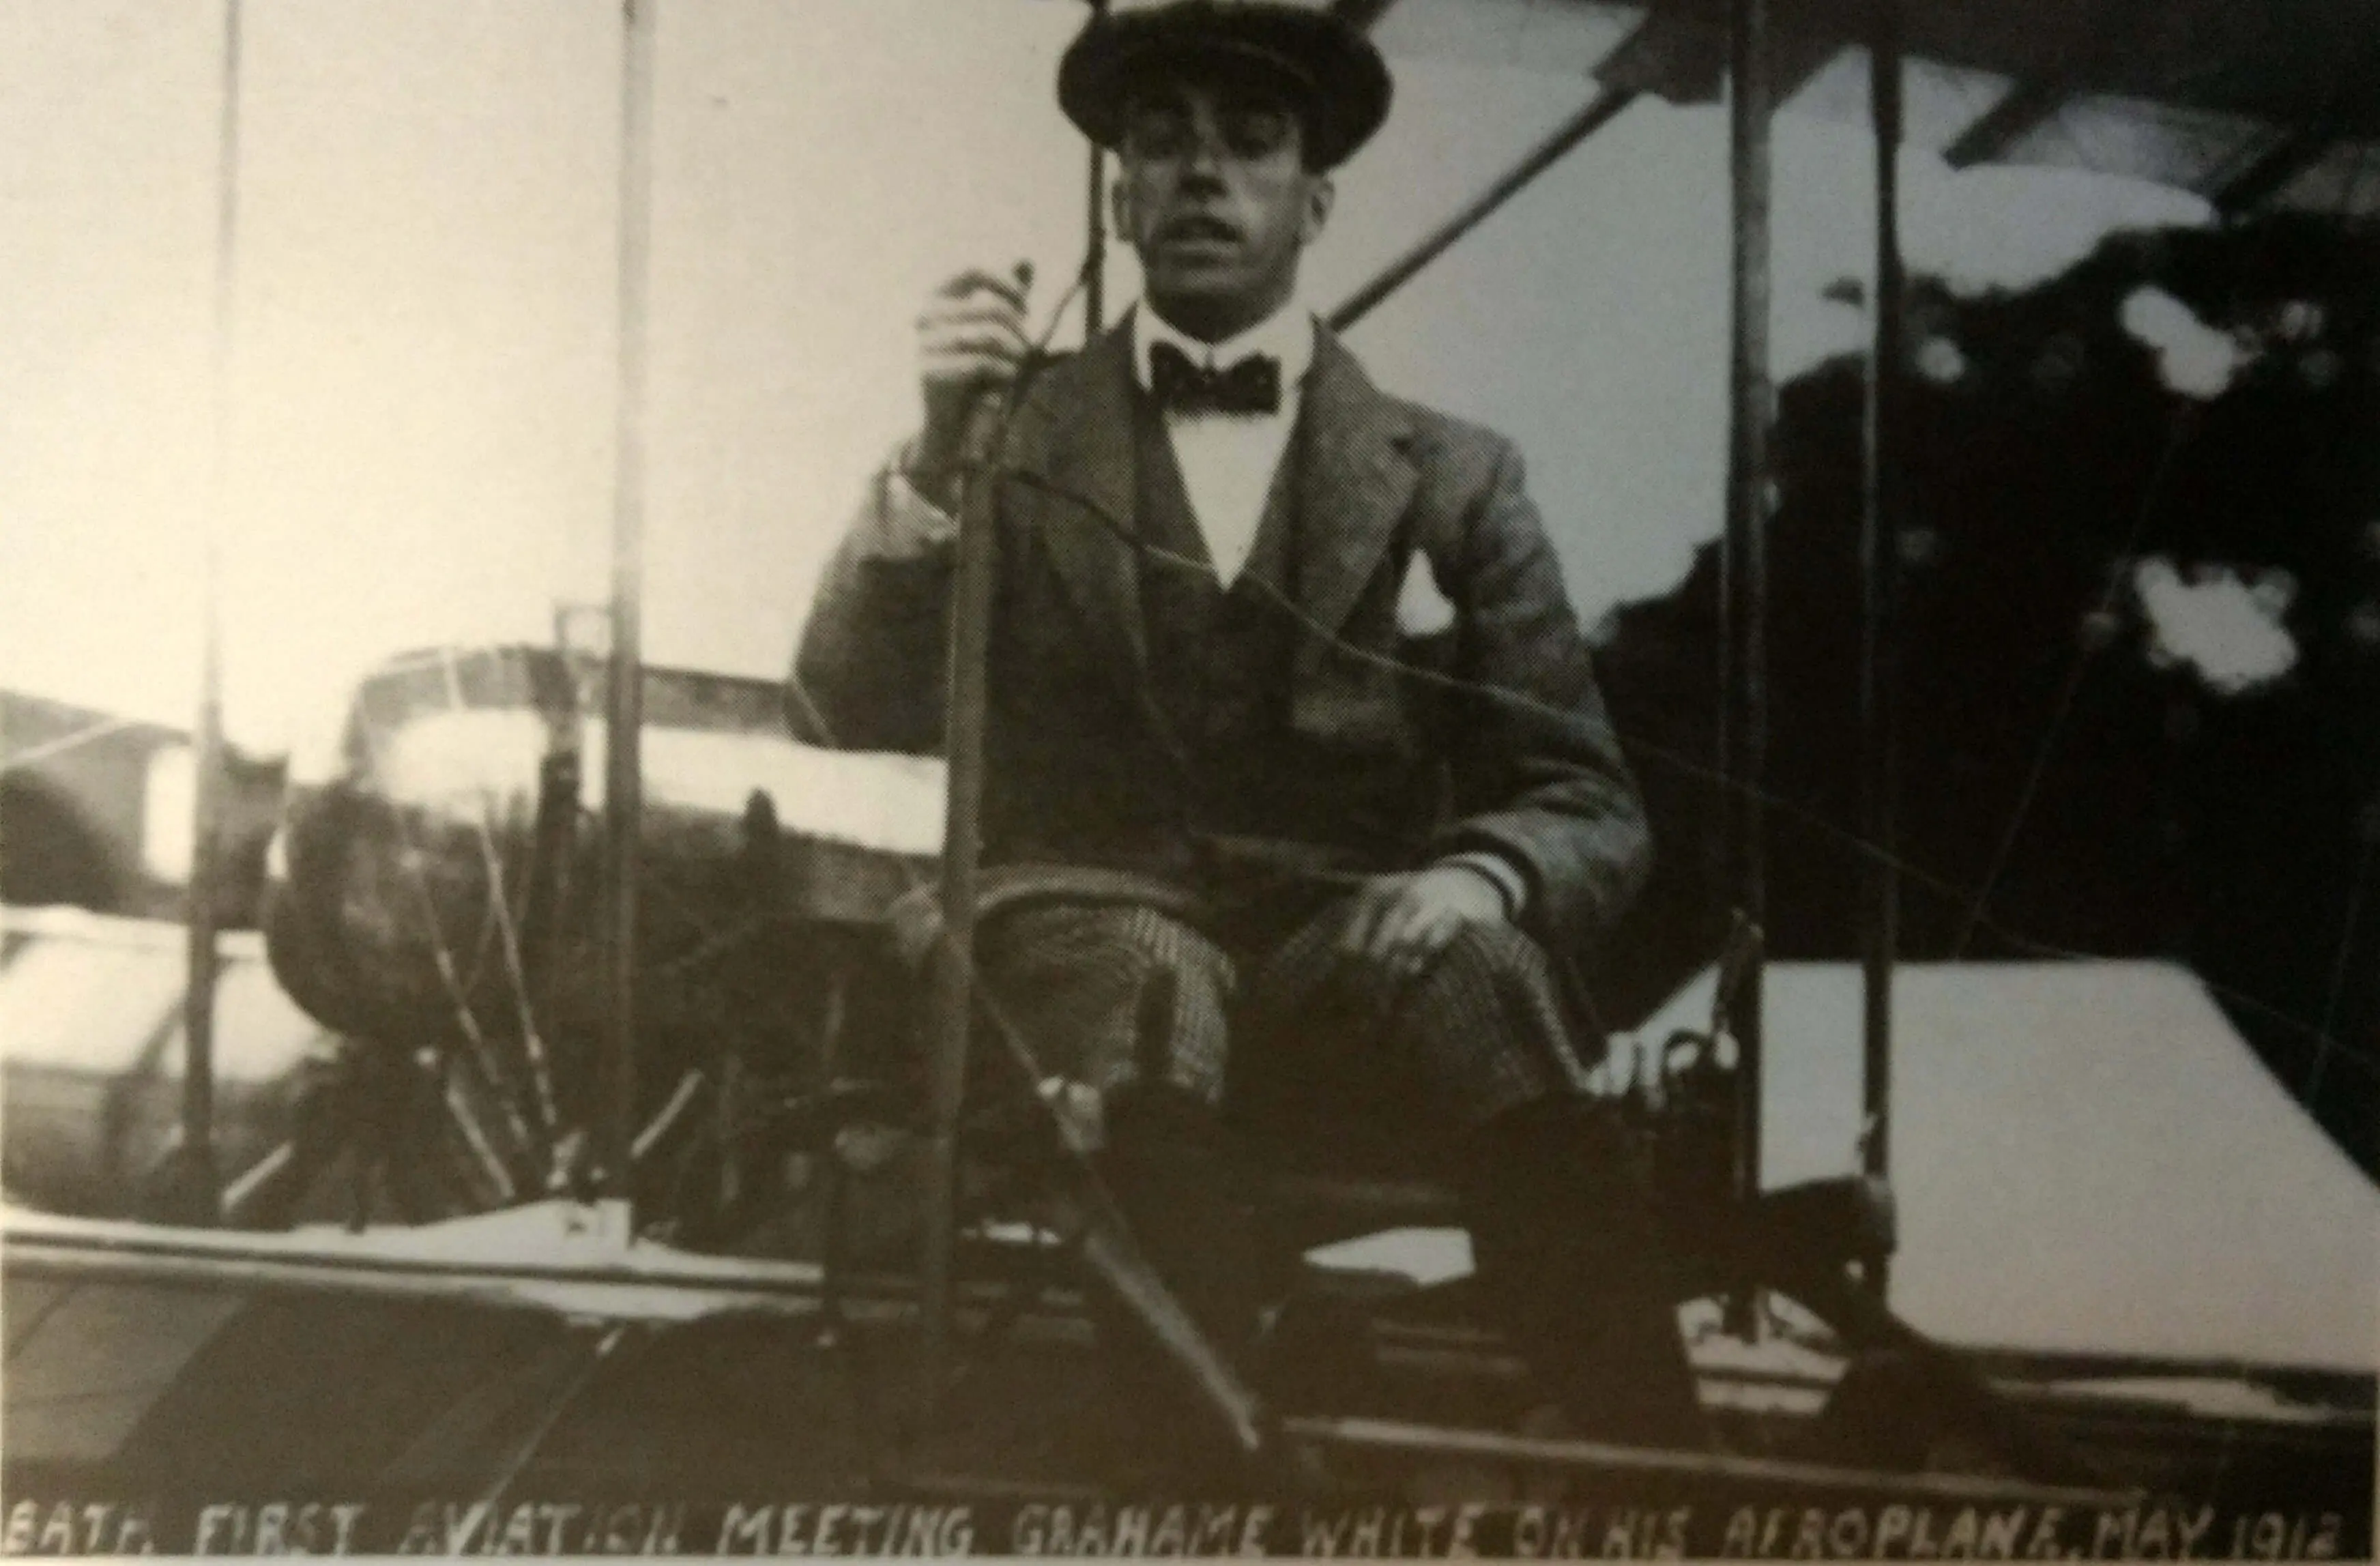 claude grahame white at first bath aviation meeting in 1912